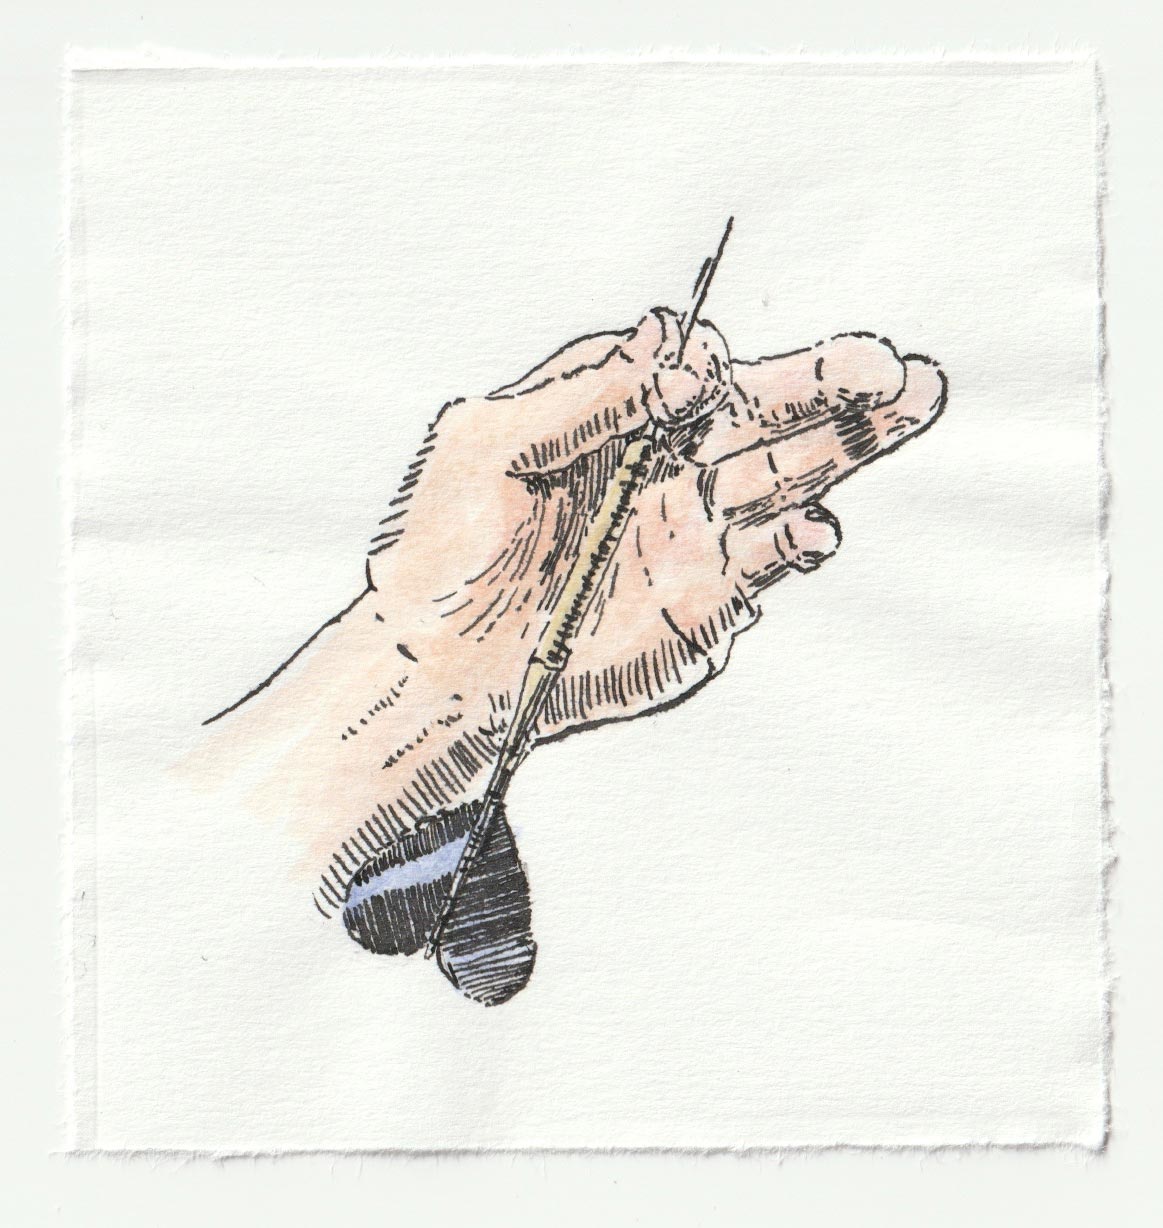 Small watercolor drawing of a hand holding a playing dart.